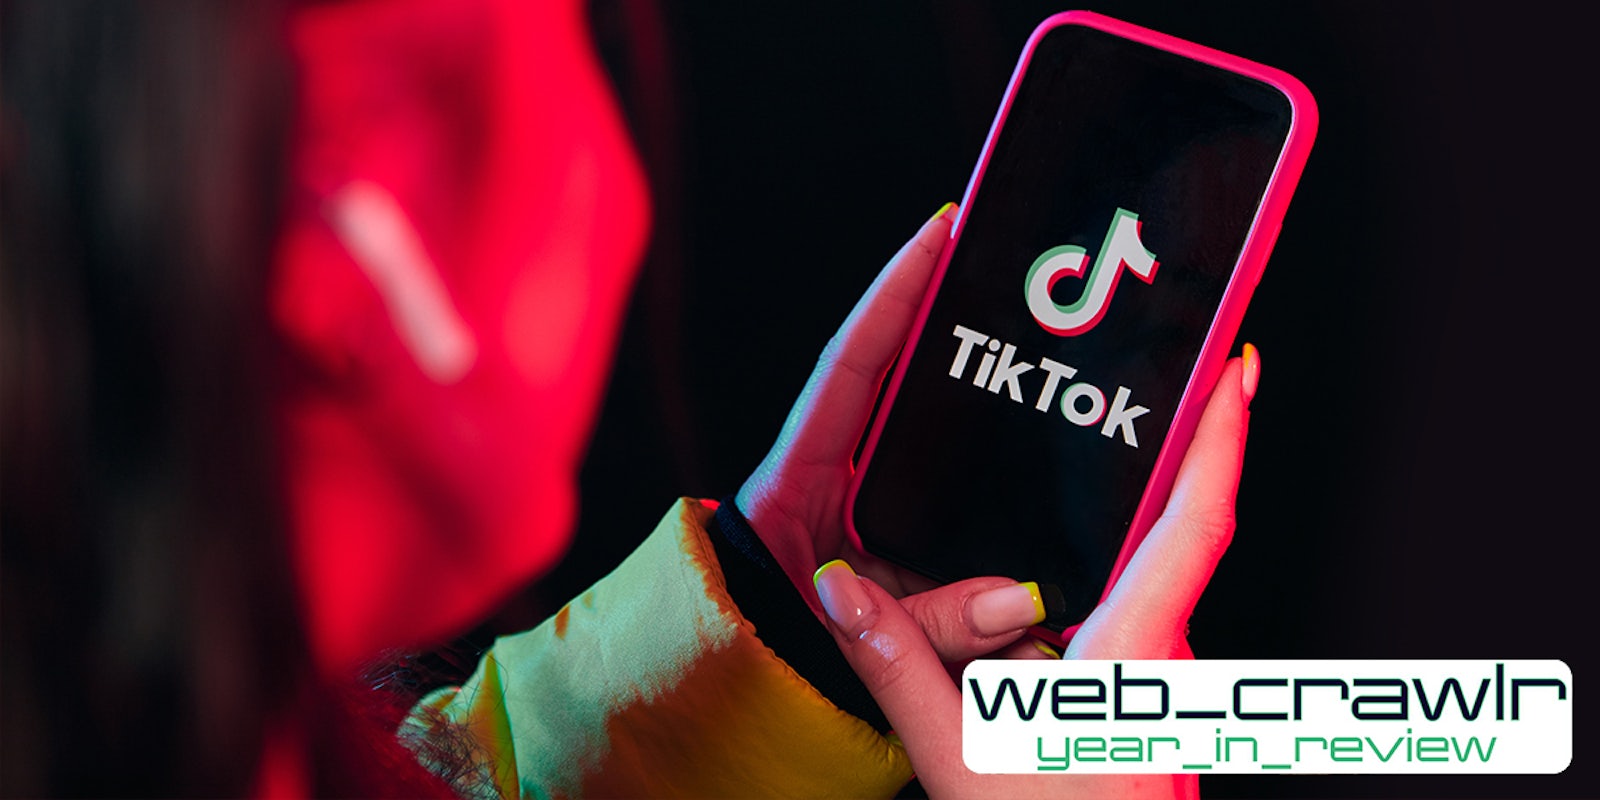 woman holding phone with TikTok logo in front of black background with web_crawlr year_in_review logo at bottom right corner